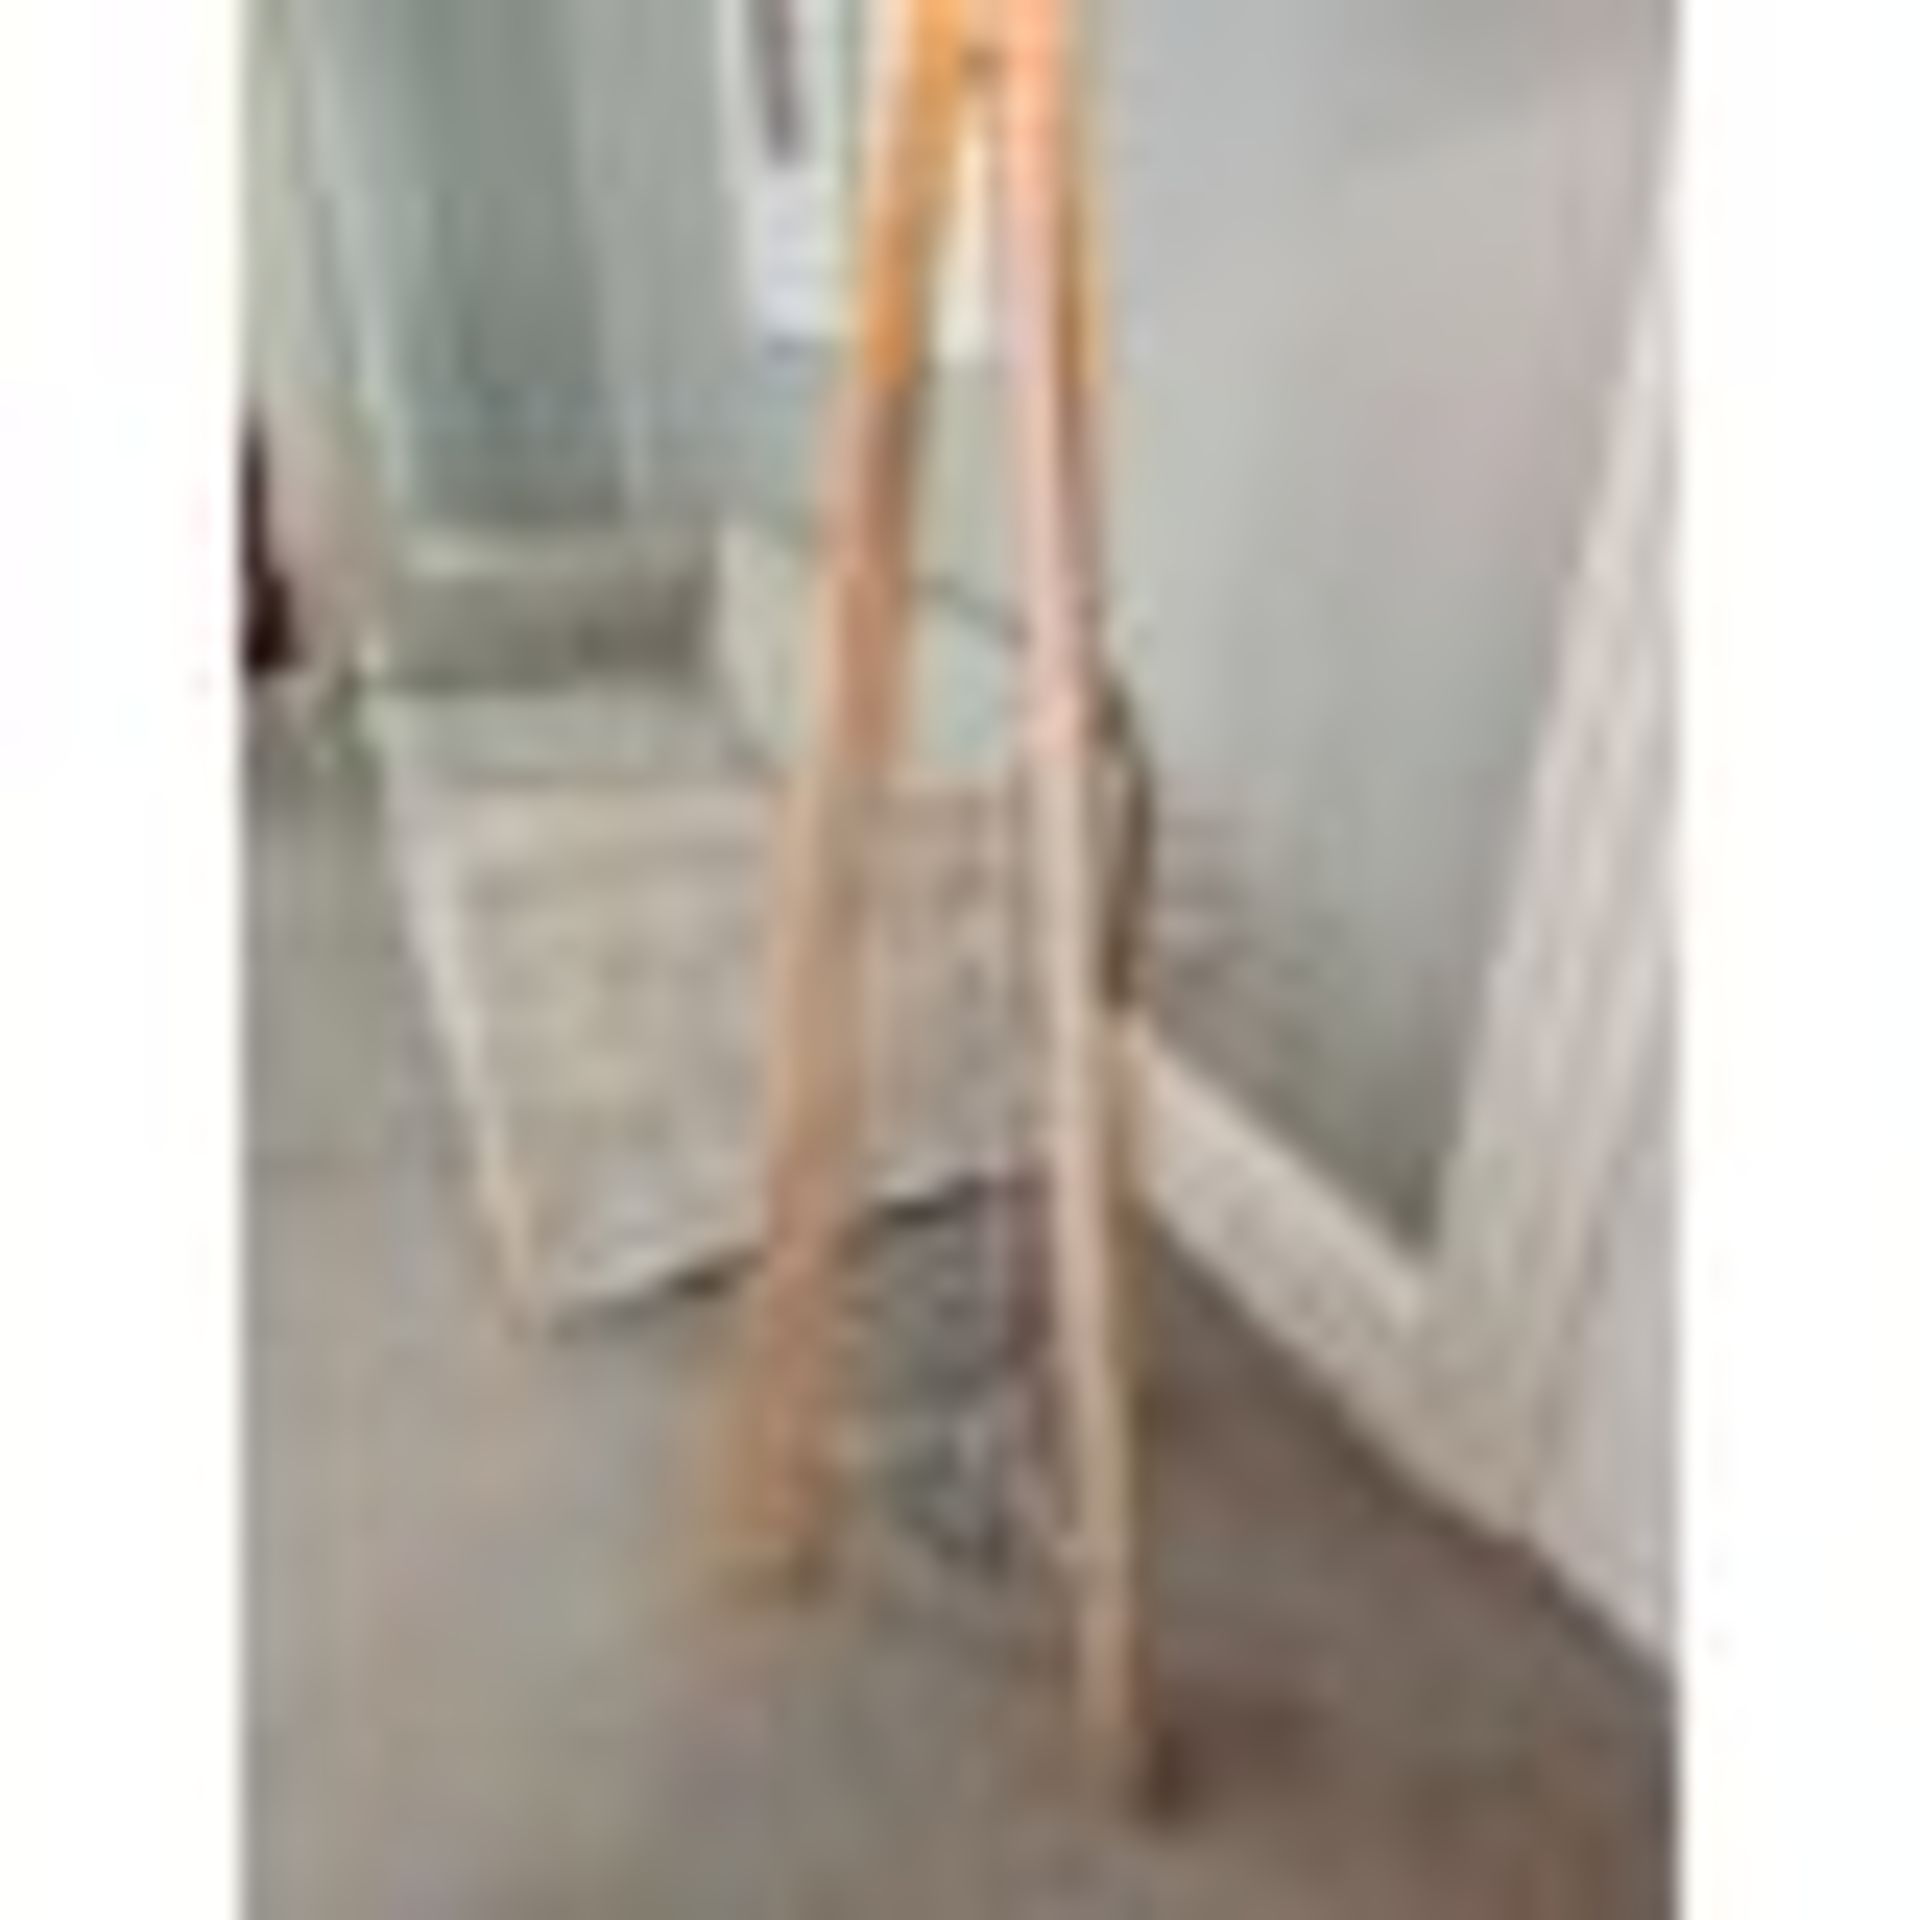 Pavillion Pr Home Tri Floor Lamp The Tri Is A Large Floor Lamp Available In Natural Meh Wood The - Image 2 of 2